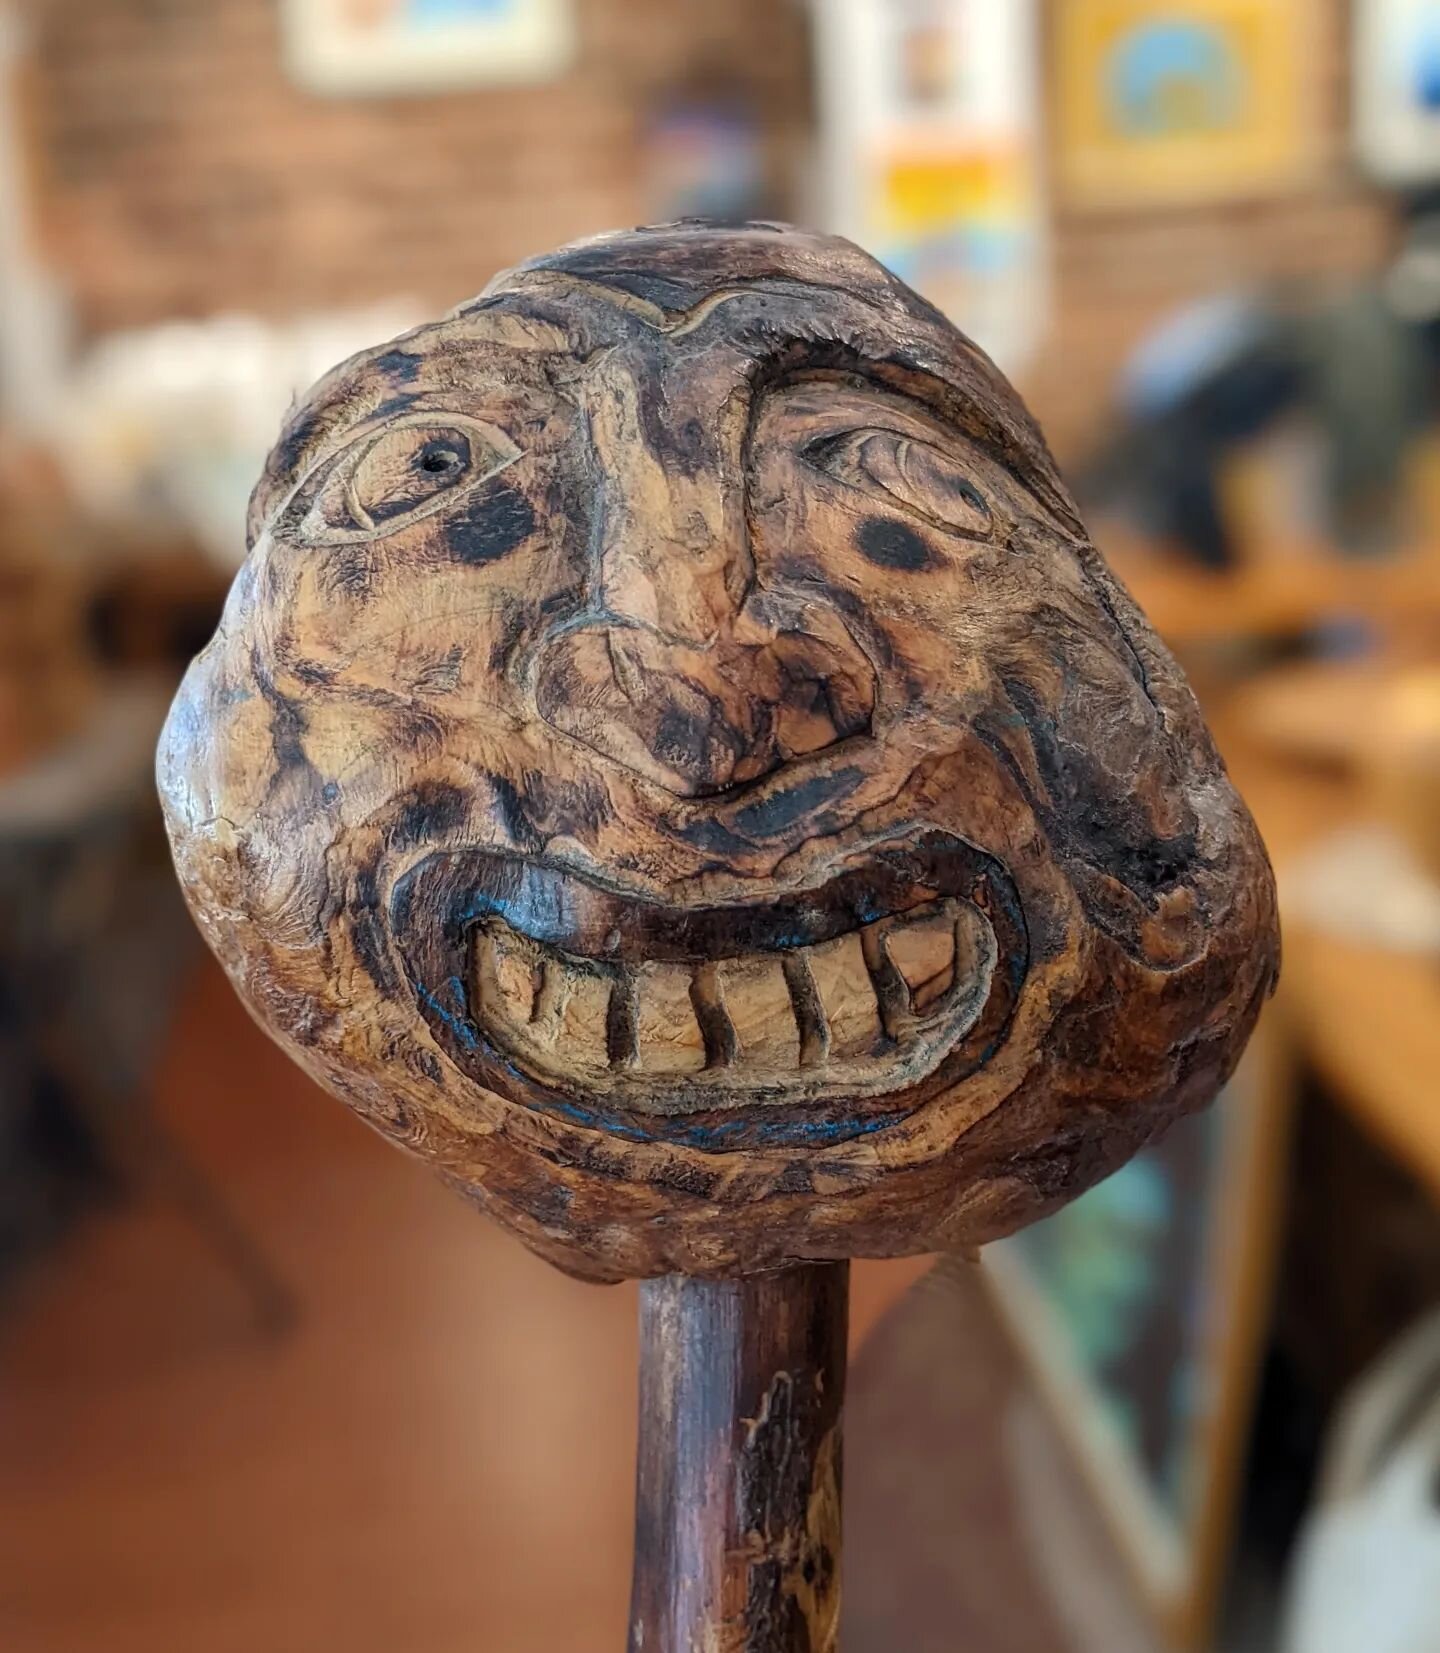 There is always someone interesting to meet at The Puffin Gallery!

(Carving in wood burl by David Brooks.)